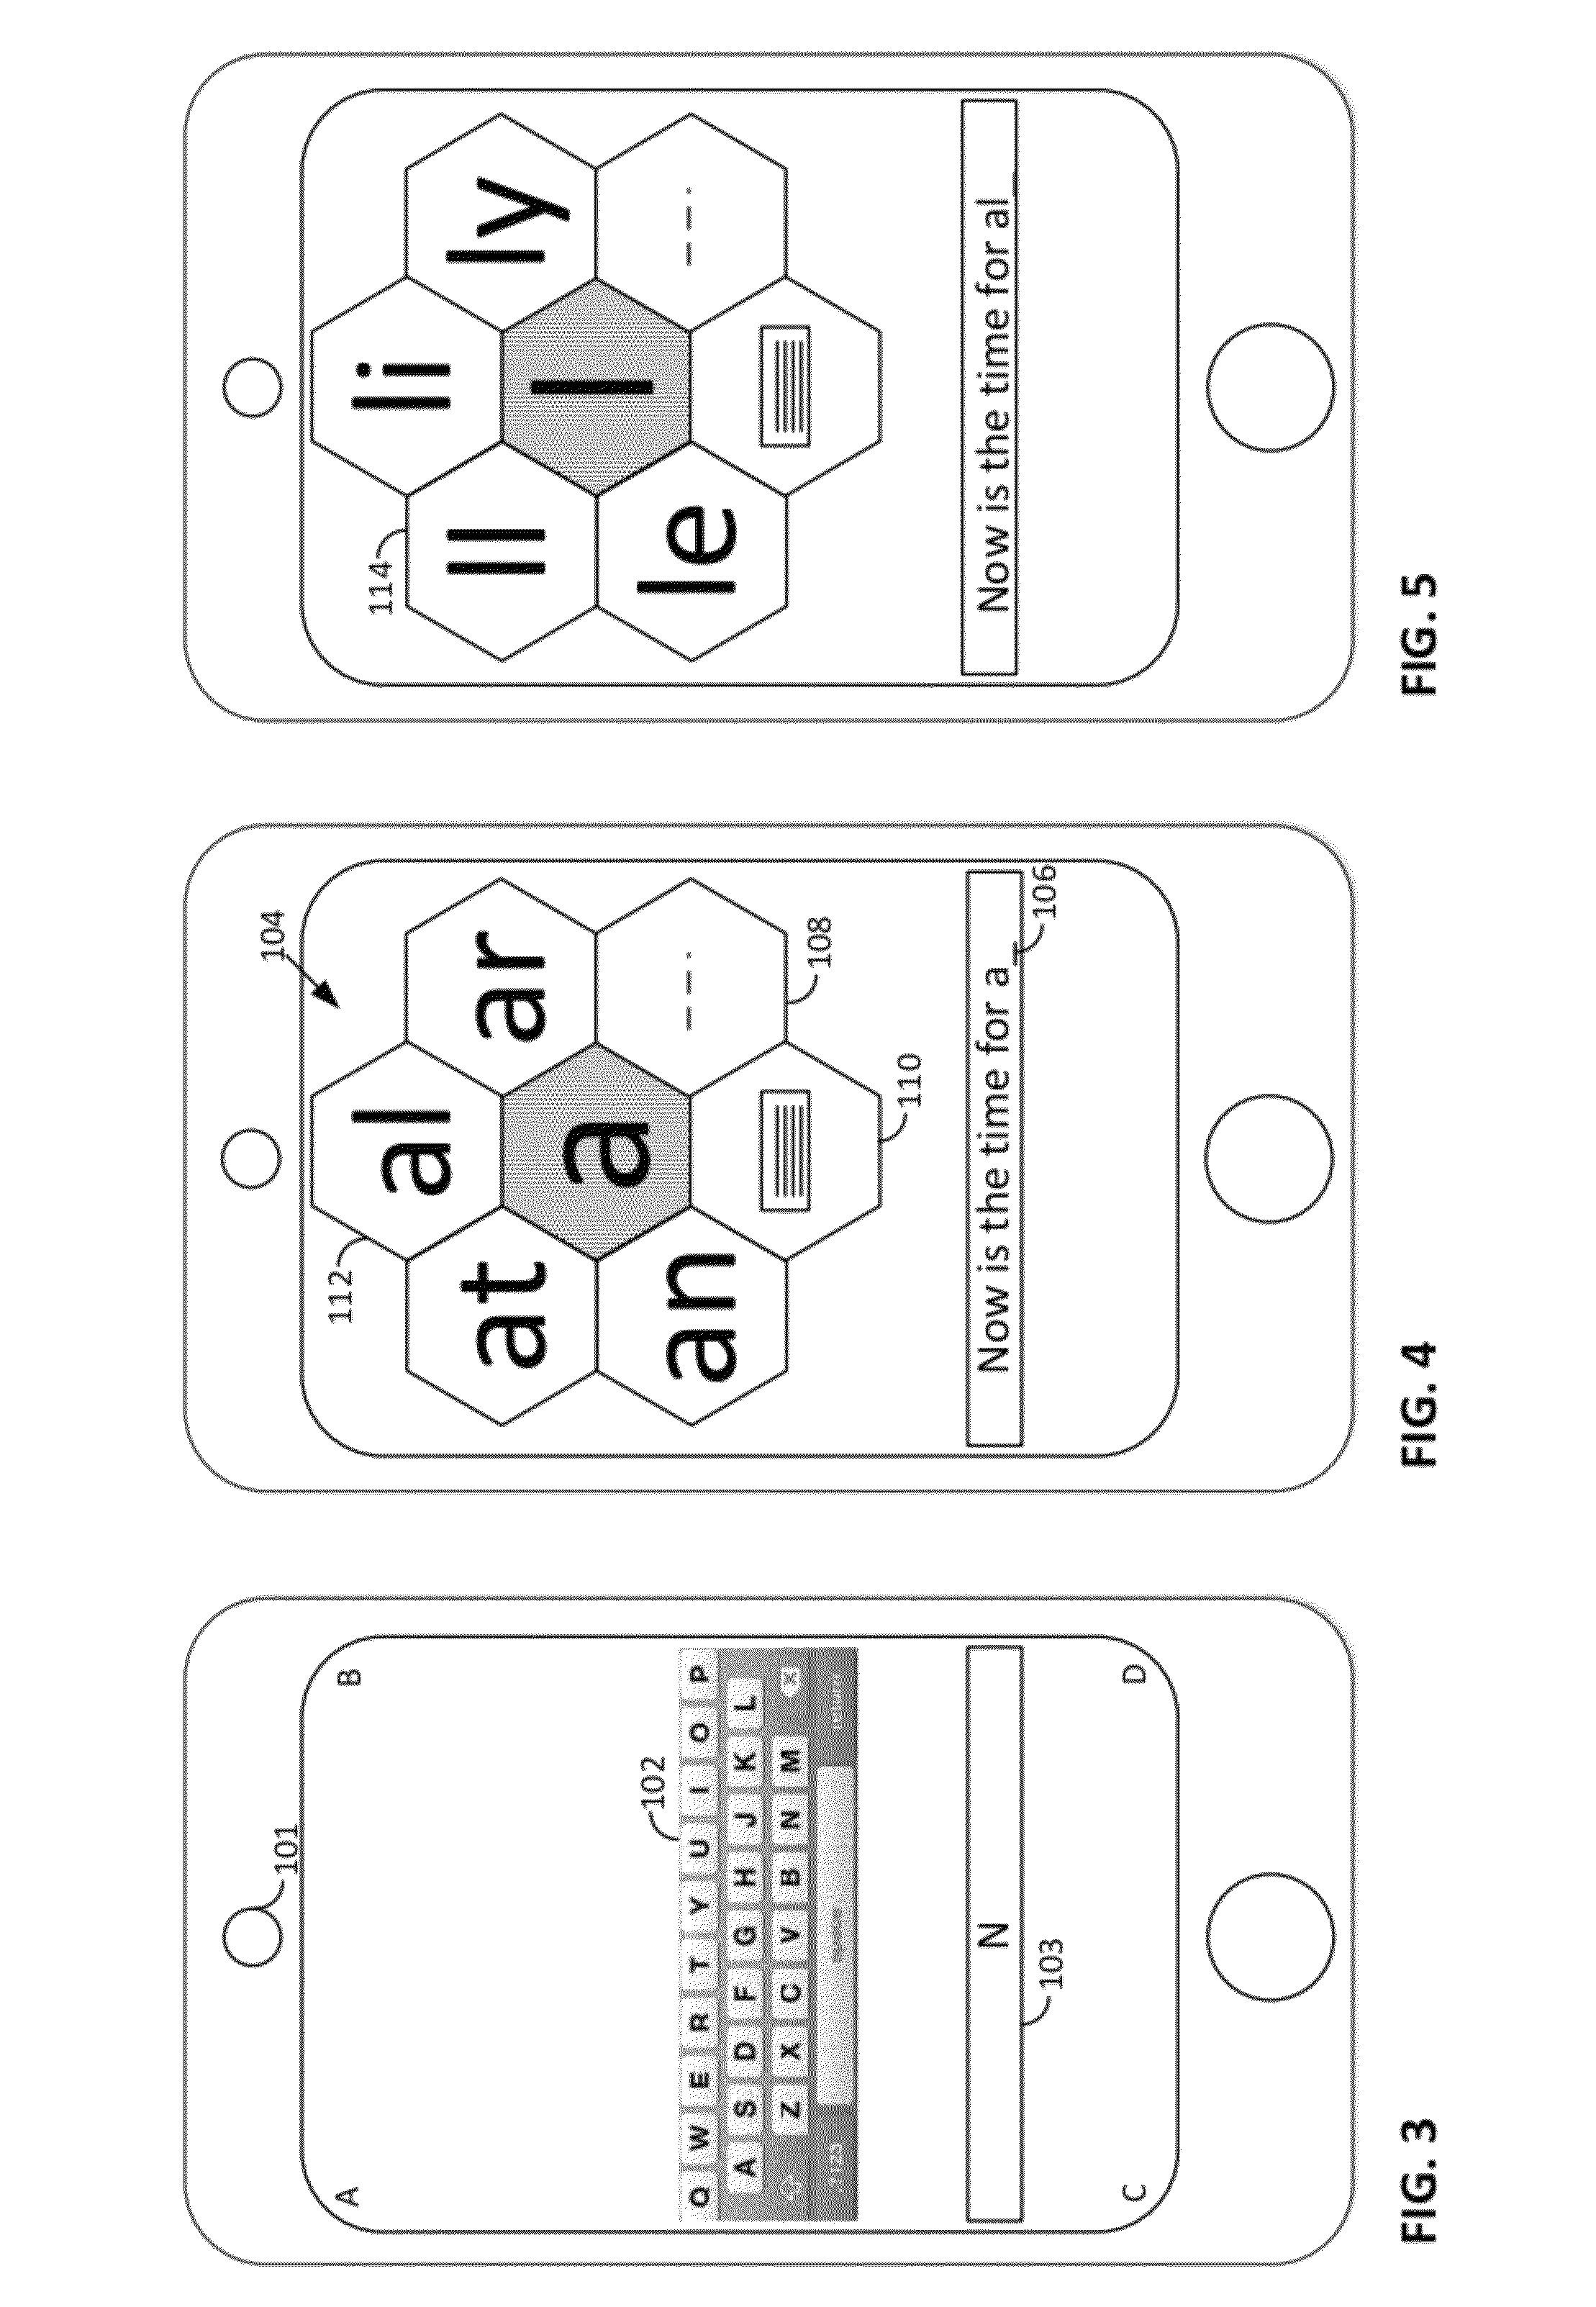 Methods and systems for resource management on portable devices